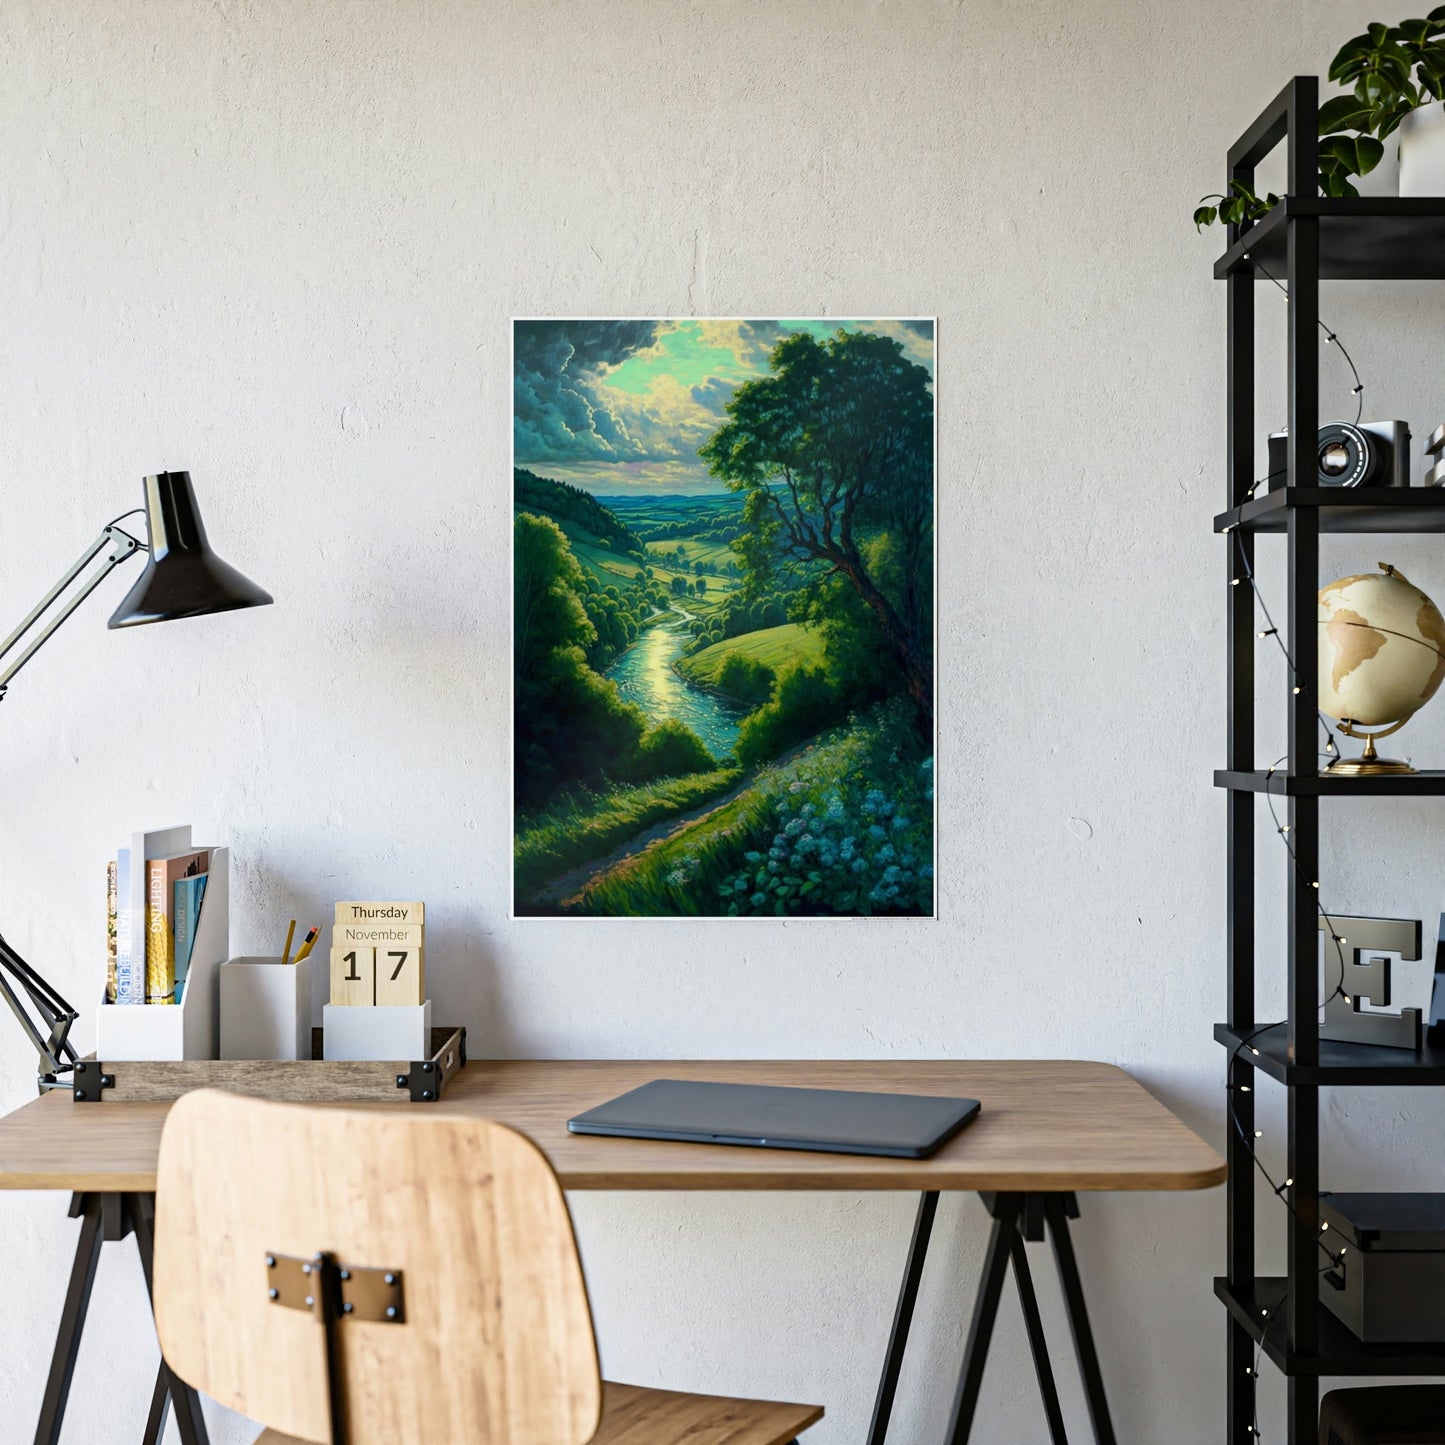 Tranquil Waterscapes: Lakes and Rivers on Canvas and Framed Poster Art